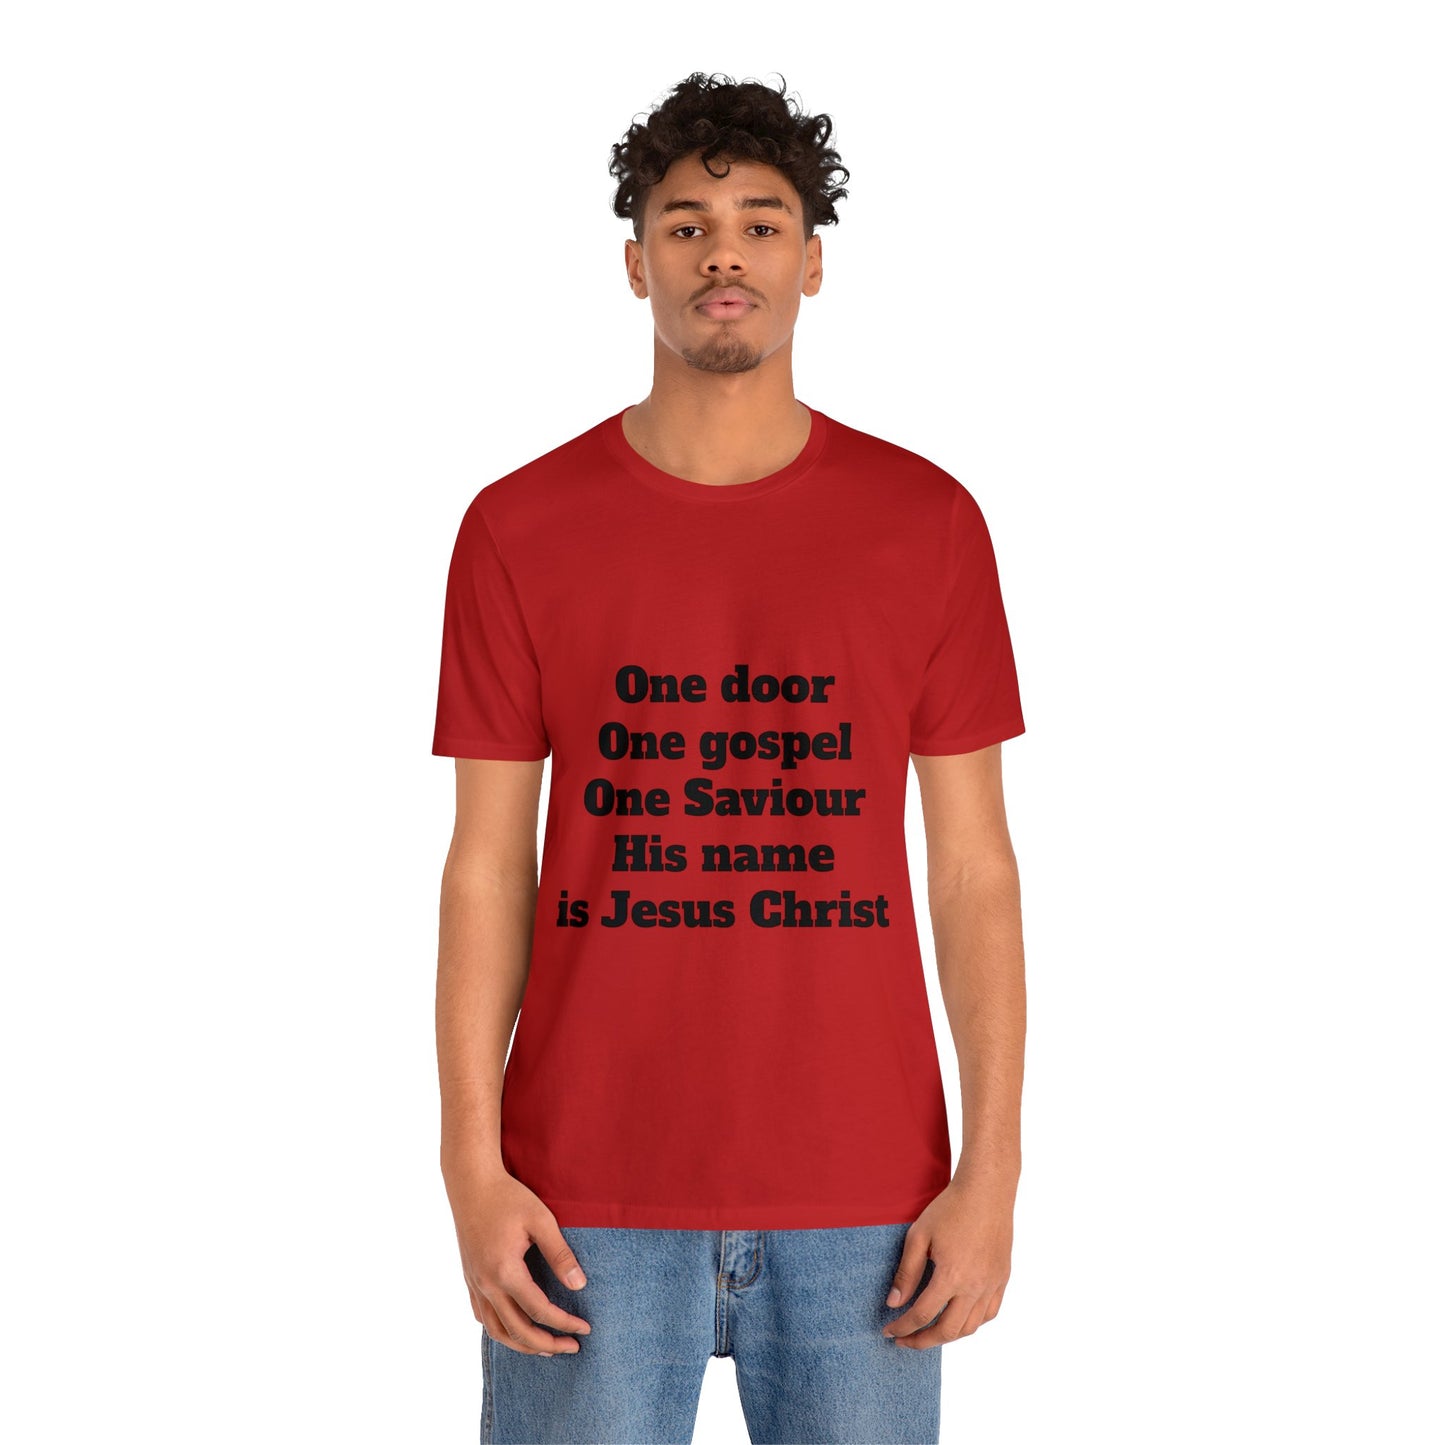 His name is Jesus Christ T-shirt (White and Red)